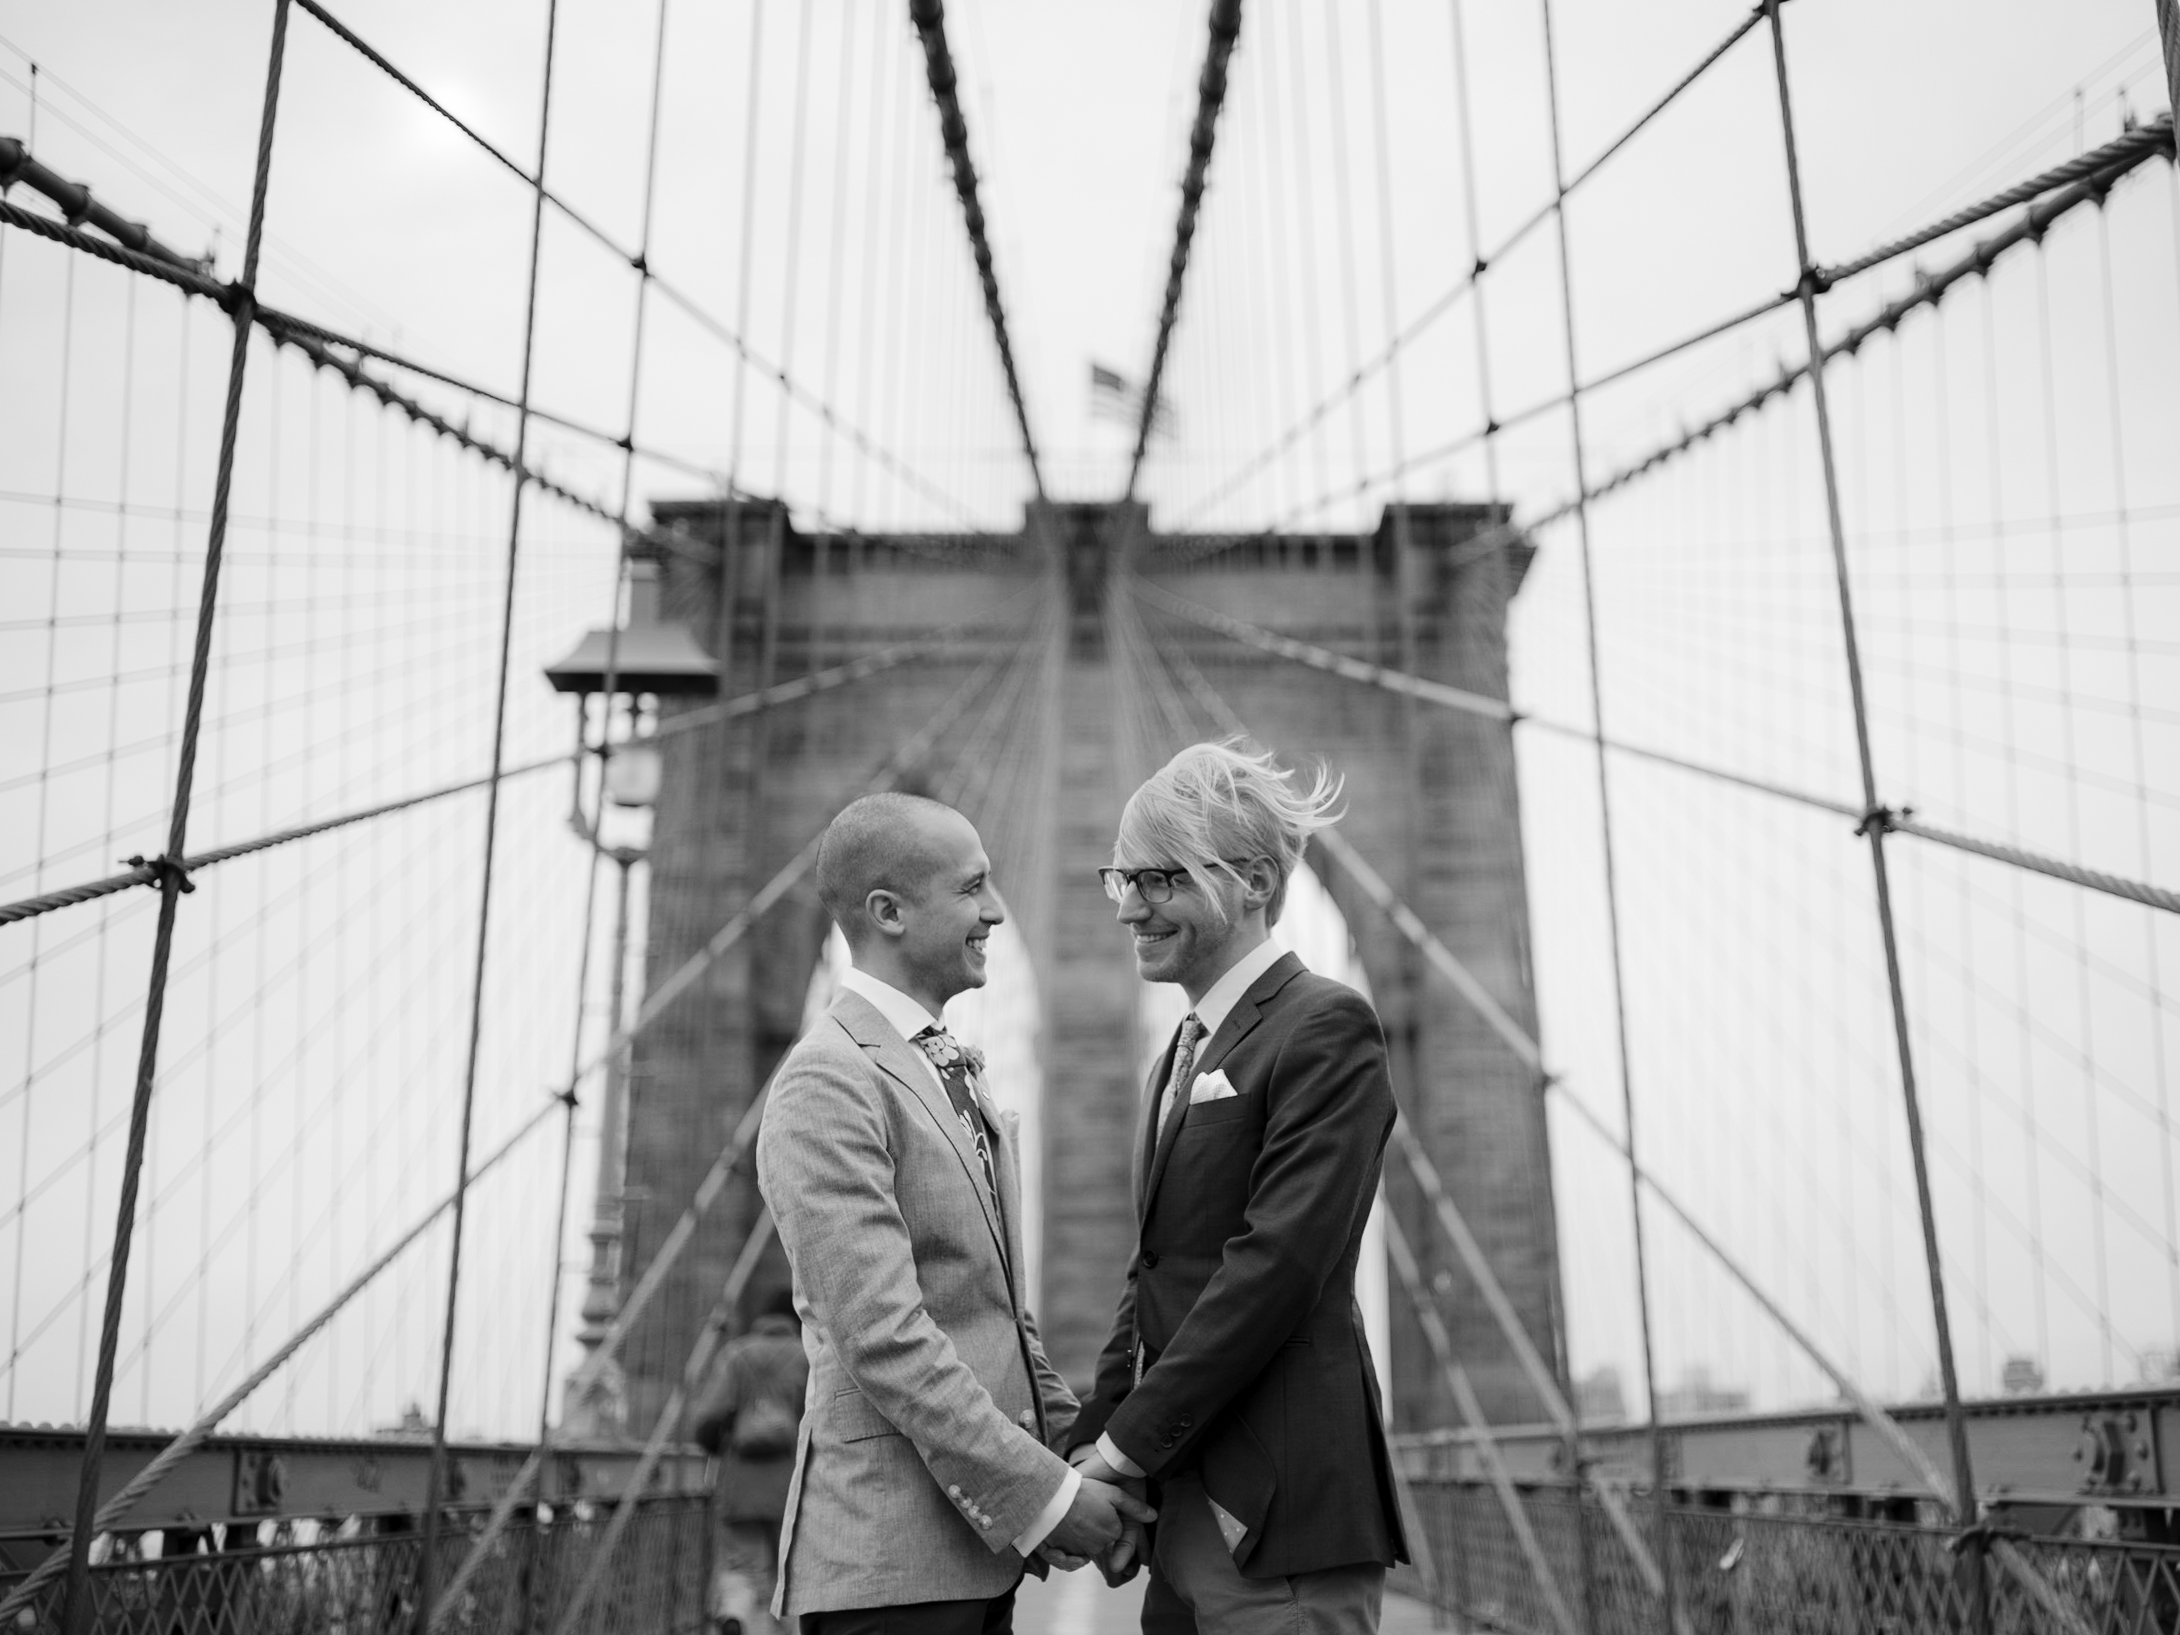 The two grooms are looking at each other happily while holding hands at Brooklyn Bridge. Elopement image by Jenny Fu Studio